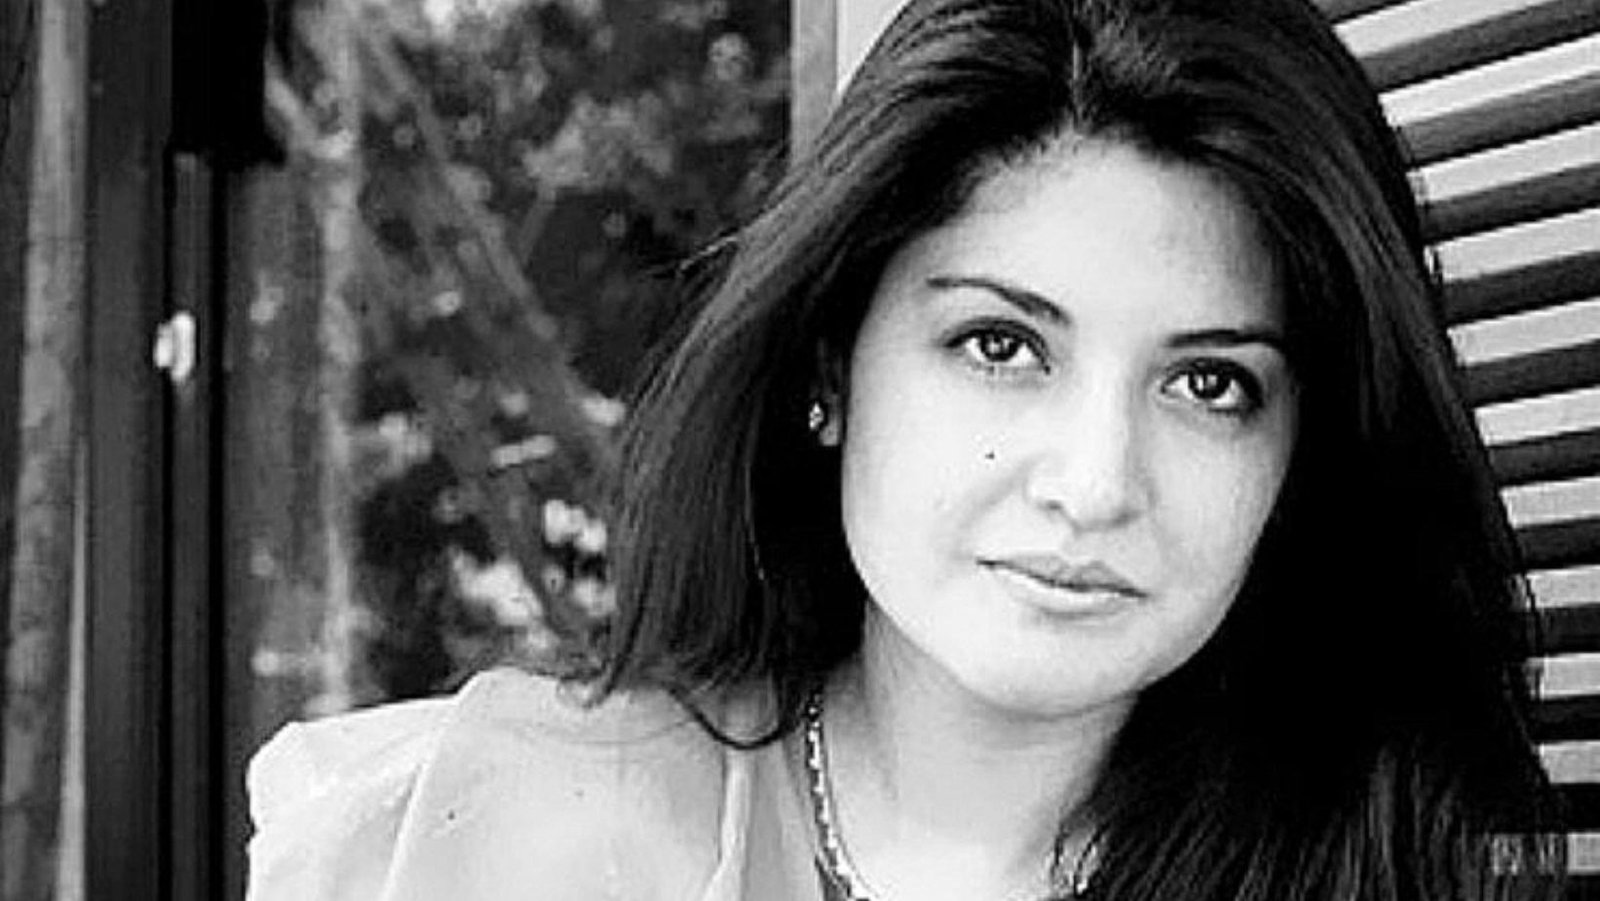 The Pop Queen Nazia Hassan will light up Times Square on the occasion of her passing on the 22nd anniversary